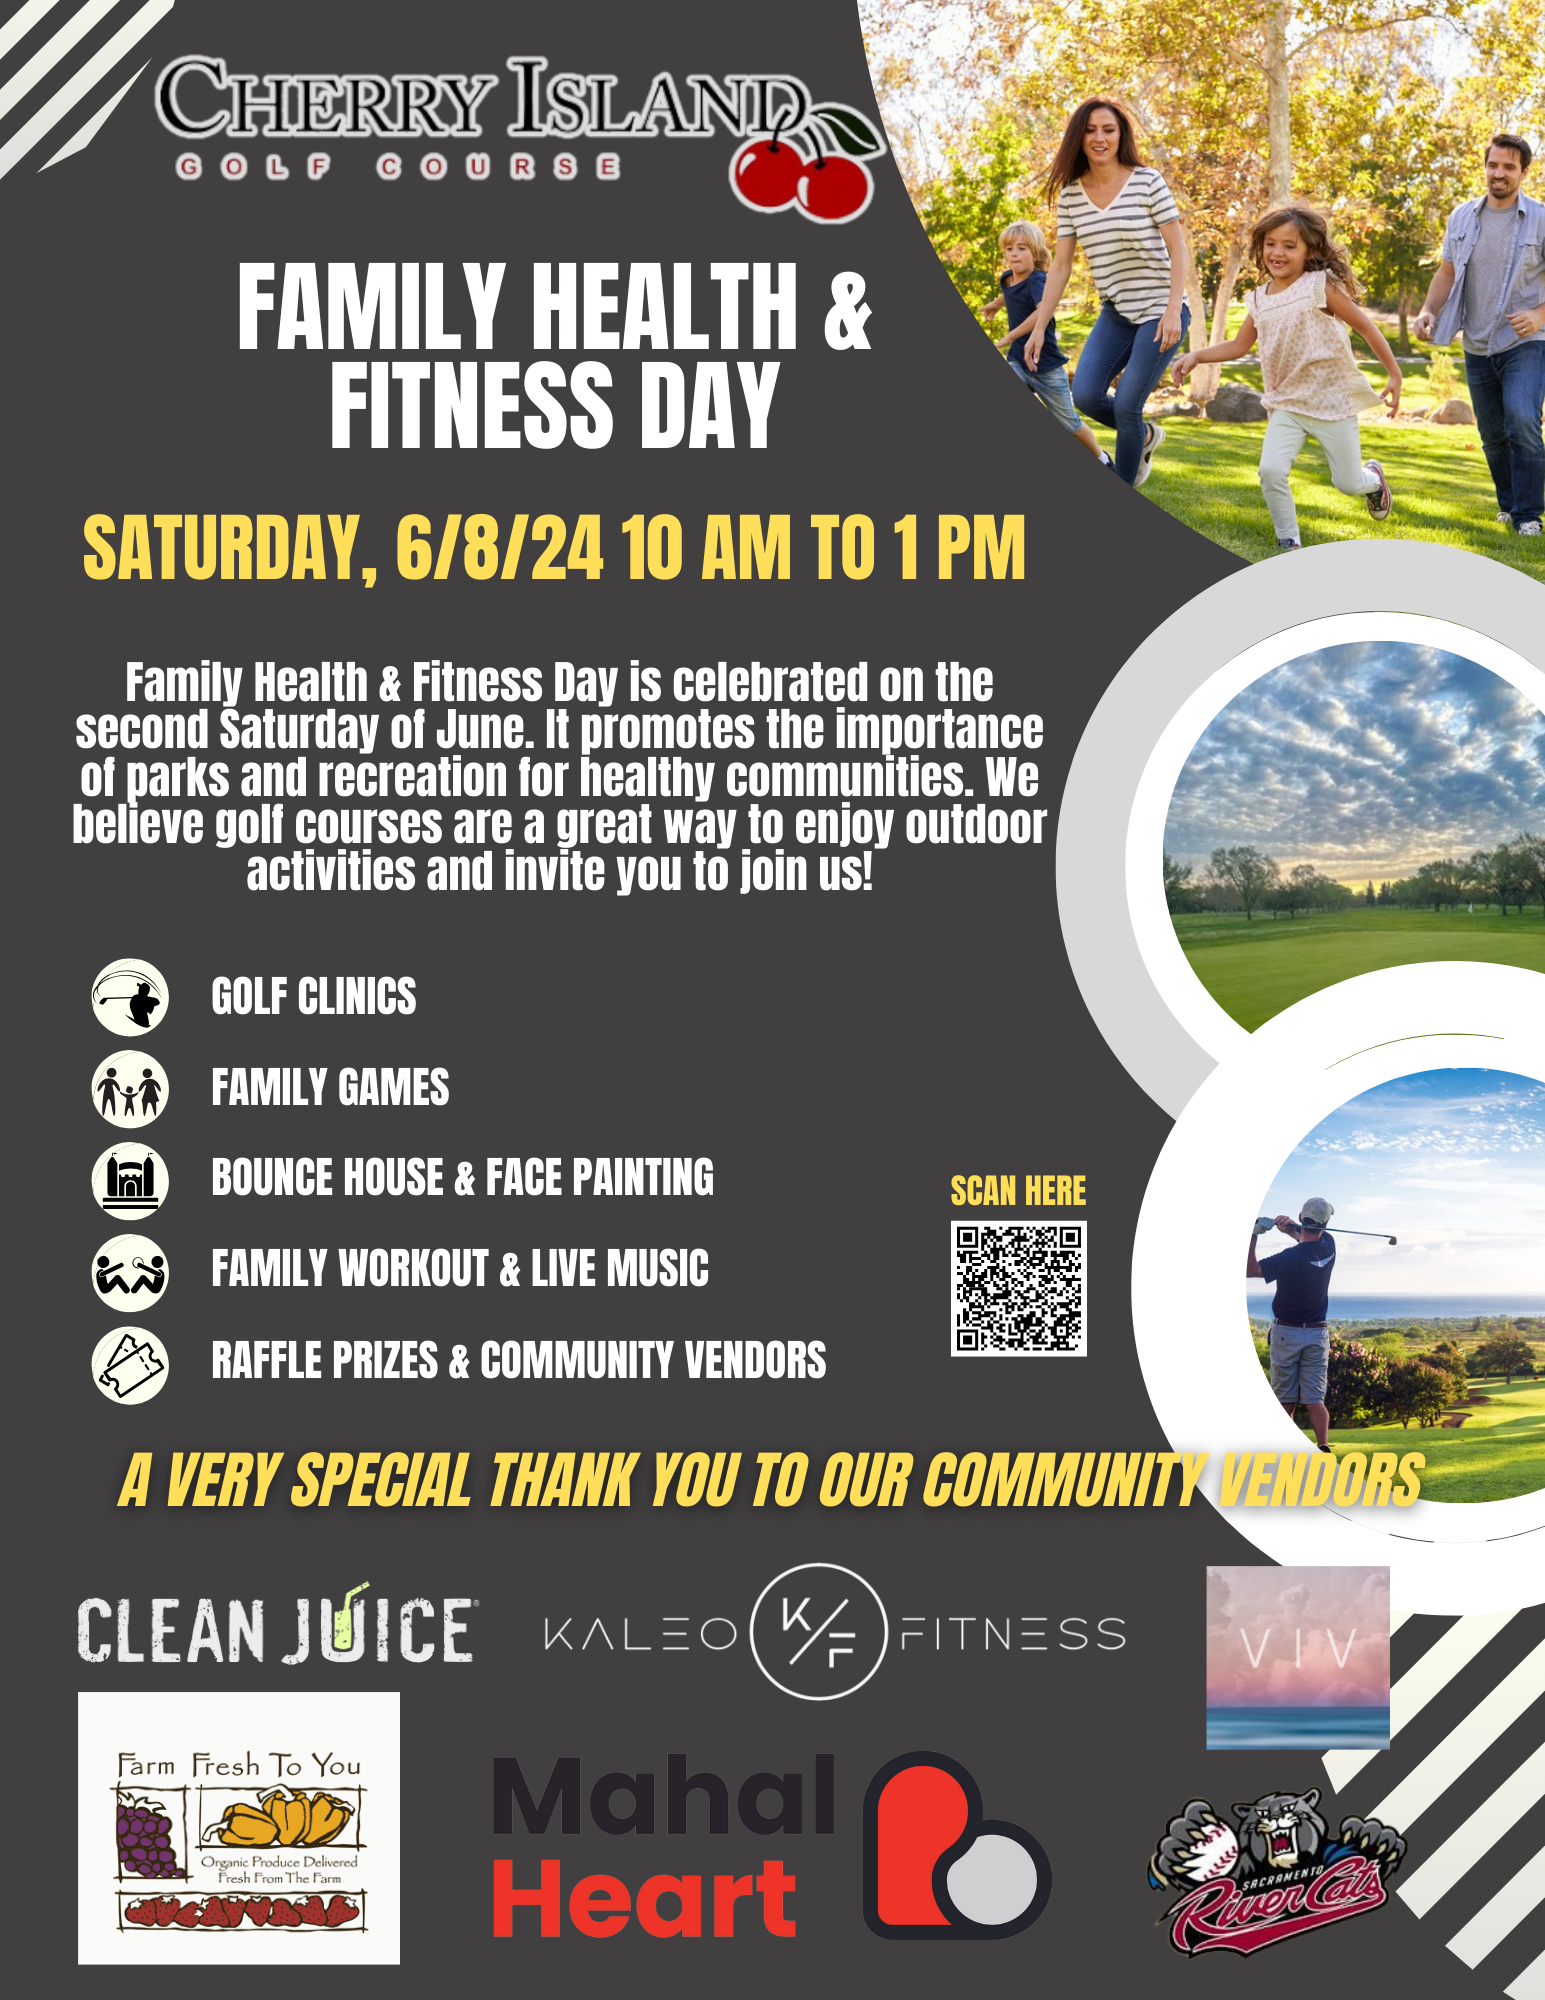 Cherry Island Family Health and Fitness Day